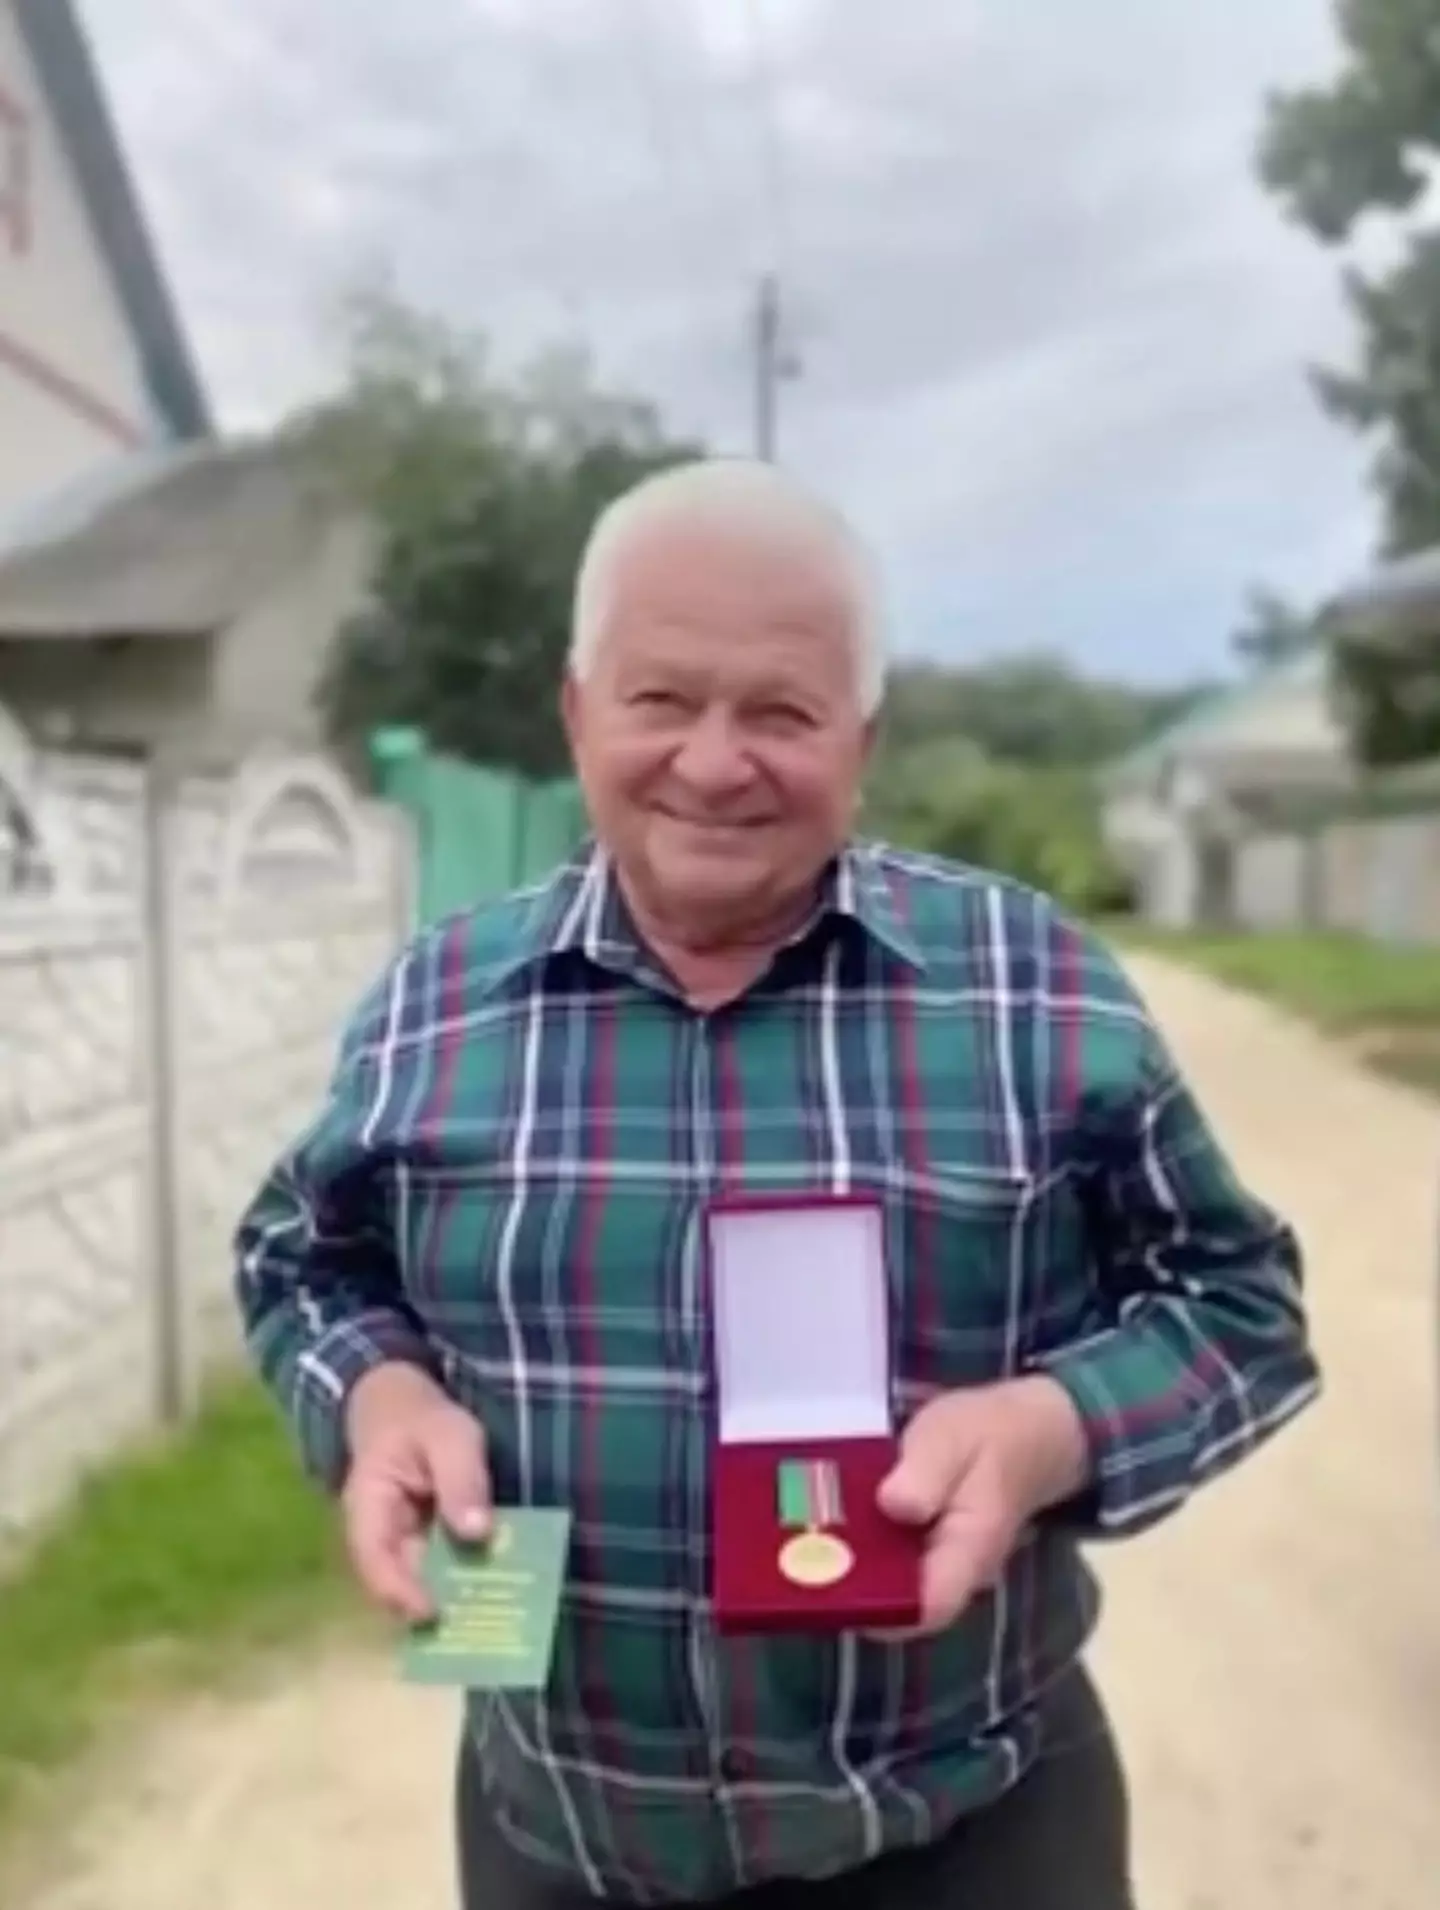 Ukraine have awarded a pensioner with a coveted medal after he remarkably shot down a £74 million Russian jet with his antique rifle, State Border Service of Ukraine have claimed.